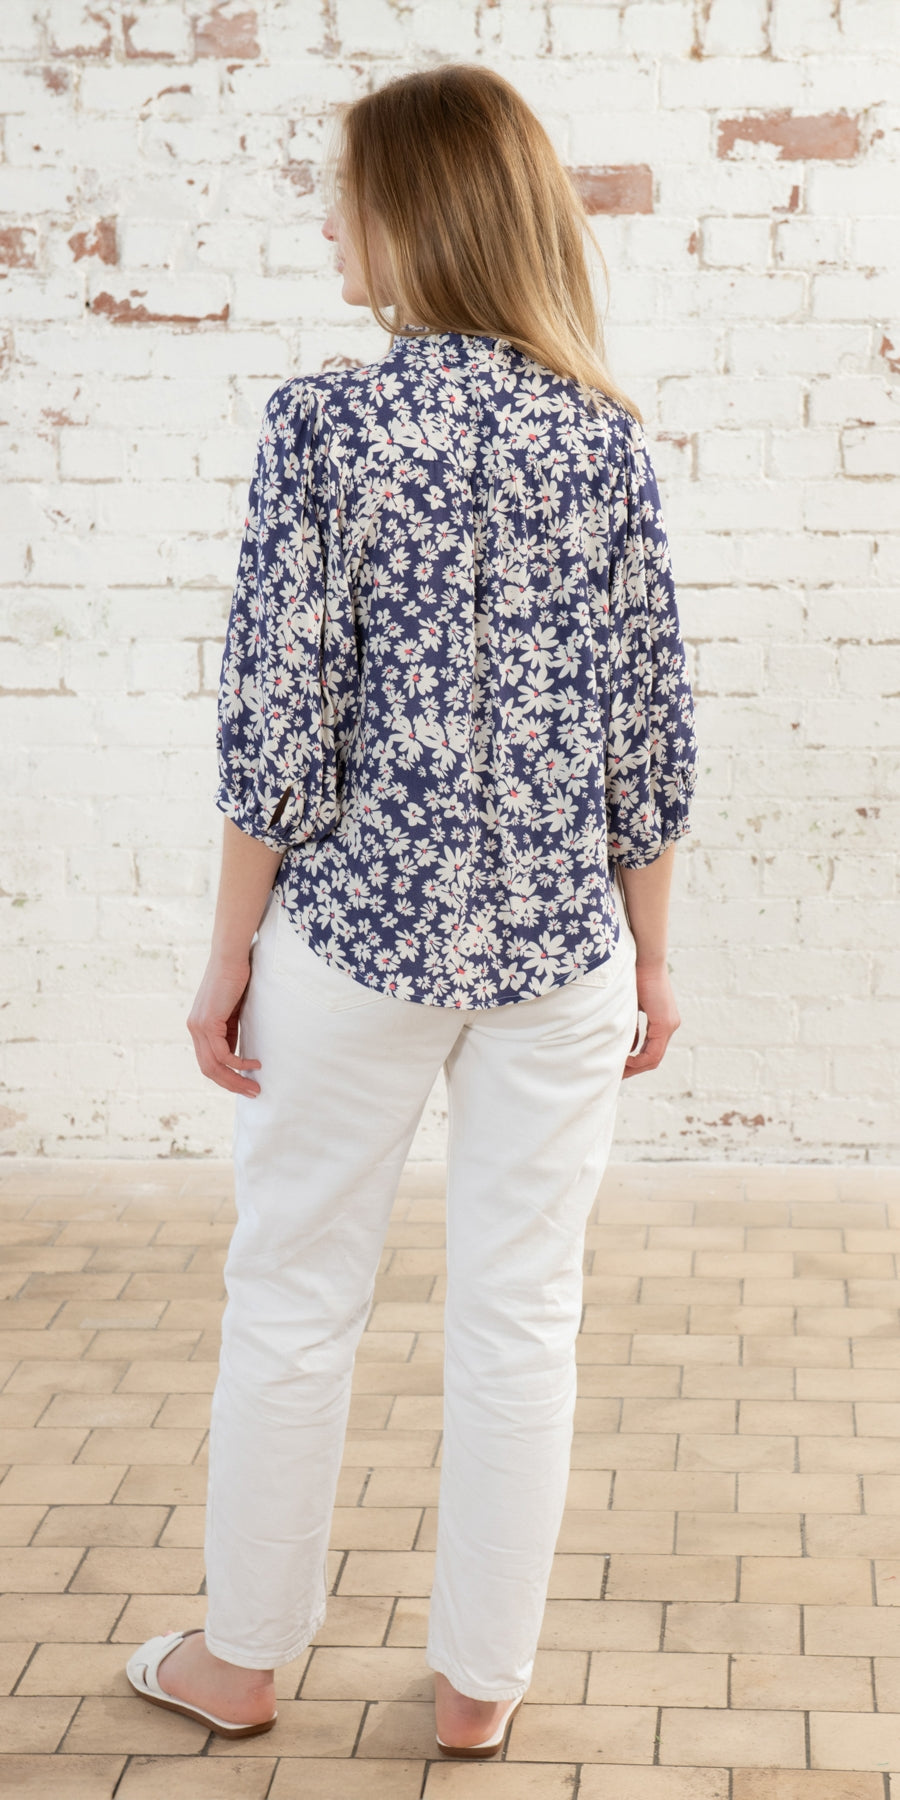 Lighthouse womens Lola blouse from Lighthouse in indigo blue with a white and yellow floral Daisy print.